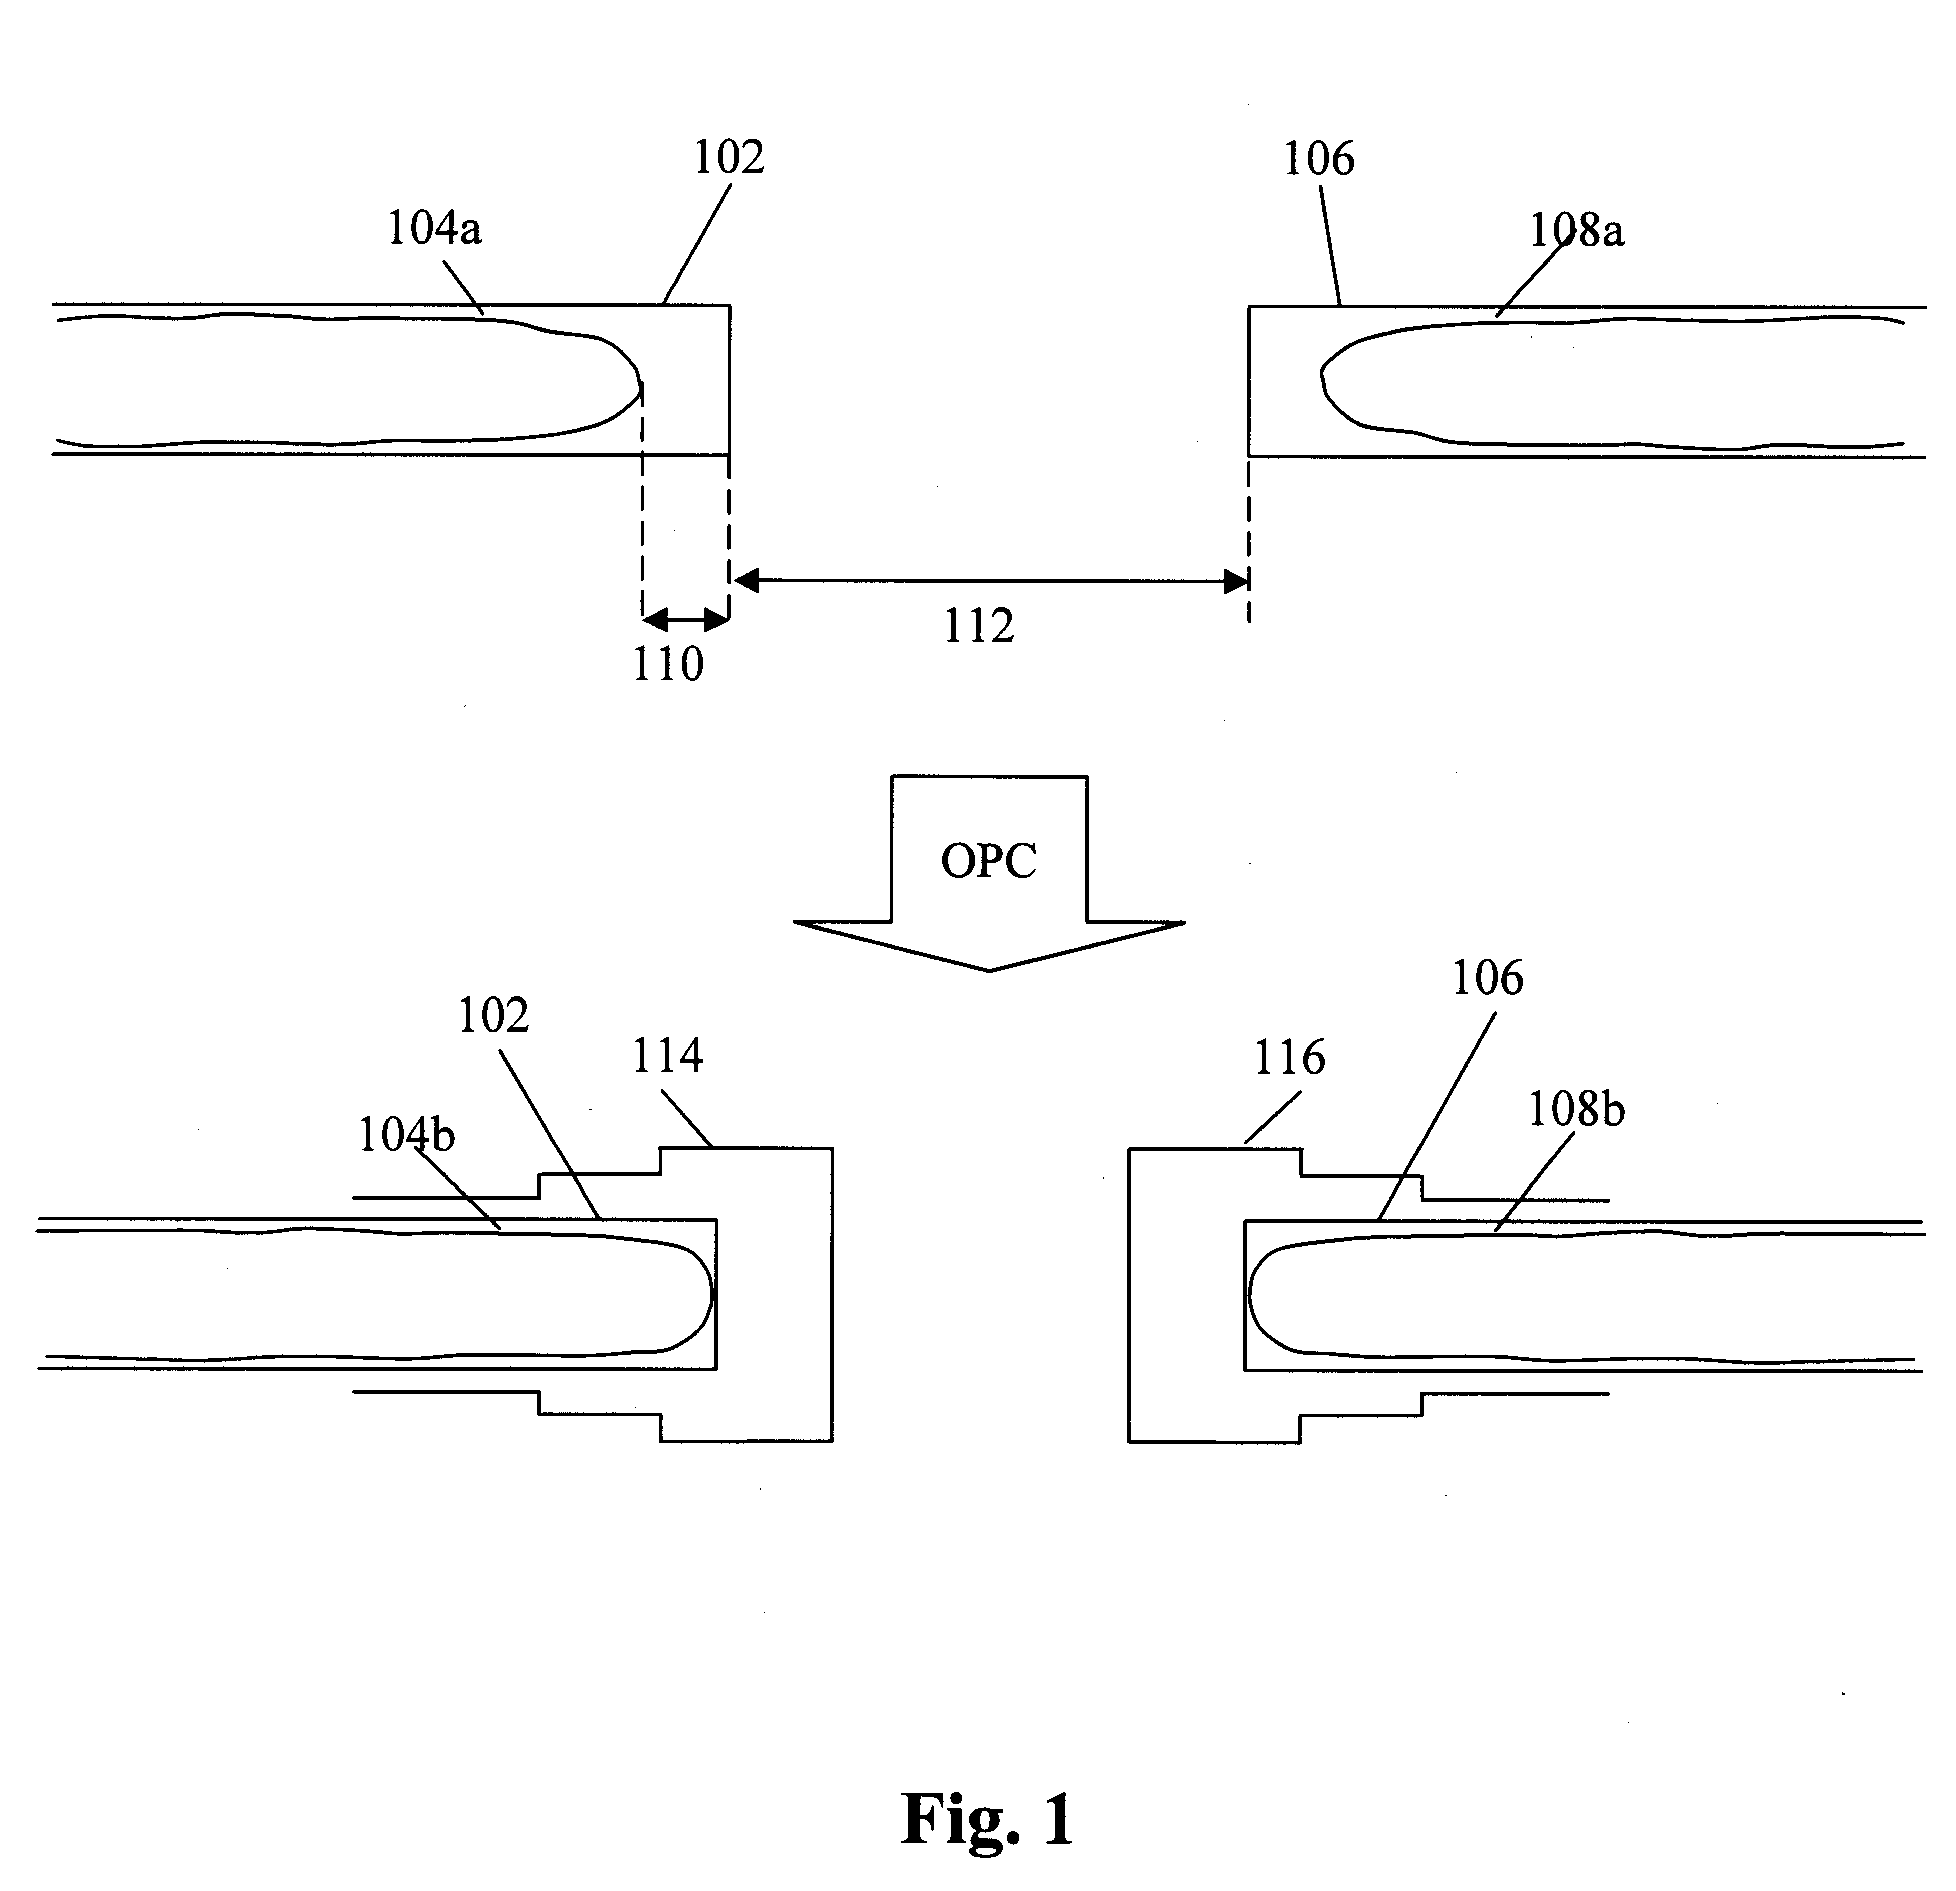 Method and System for Implementing Controlled Breaks Between Features Using Sub-Resolution Assist Features